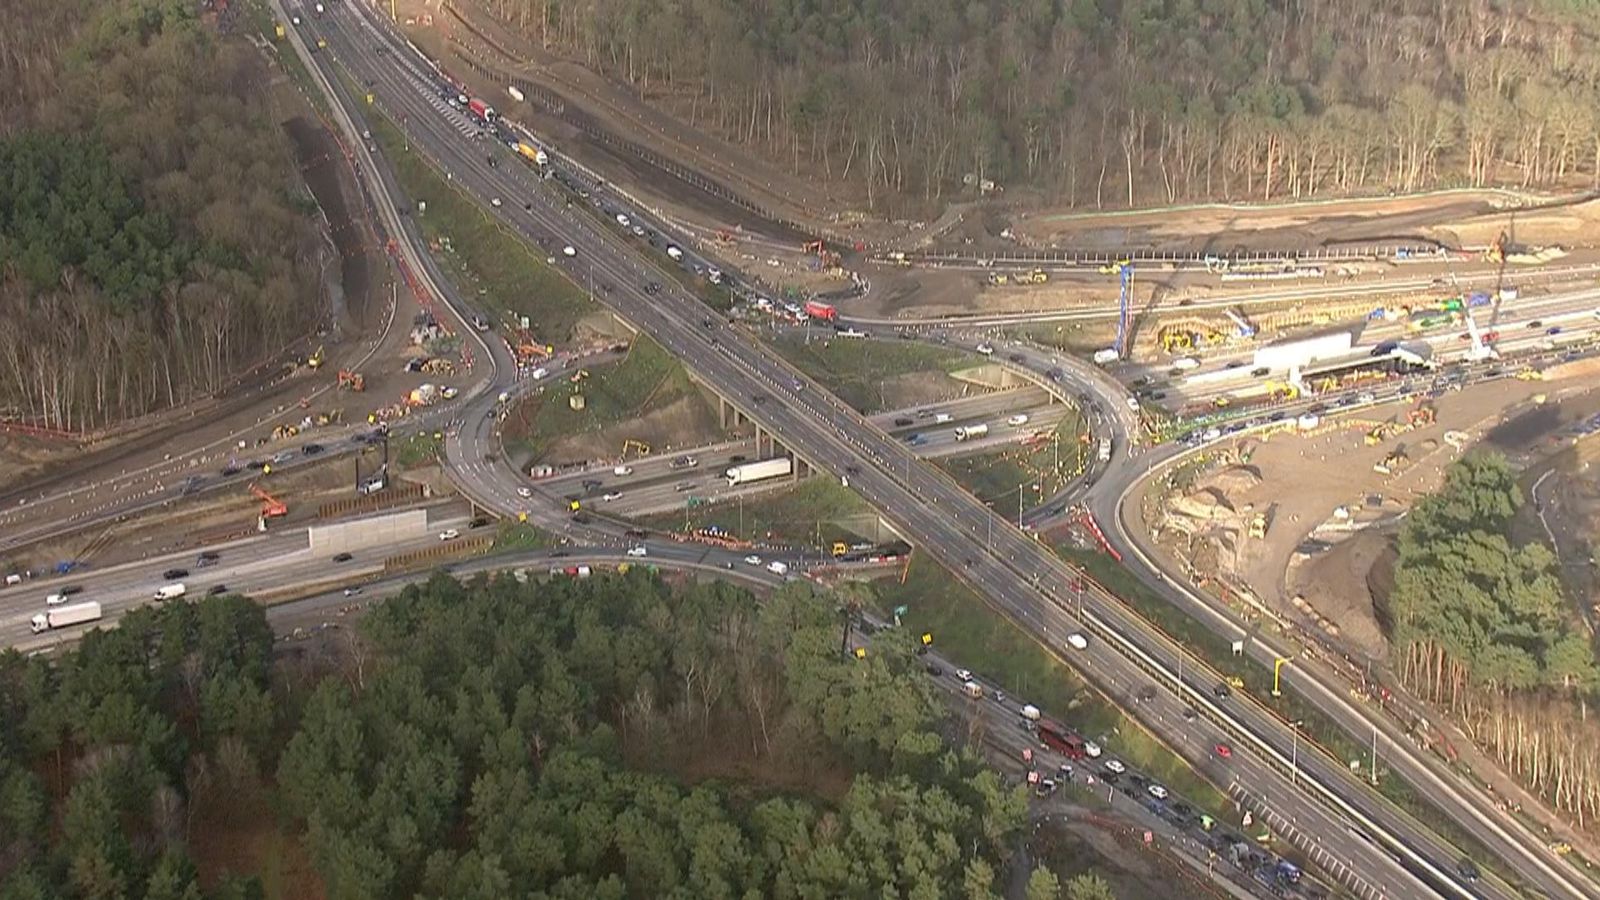 Unprecedented M25 closure could be 'nightmare' as busy section shuts